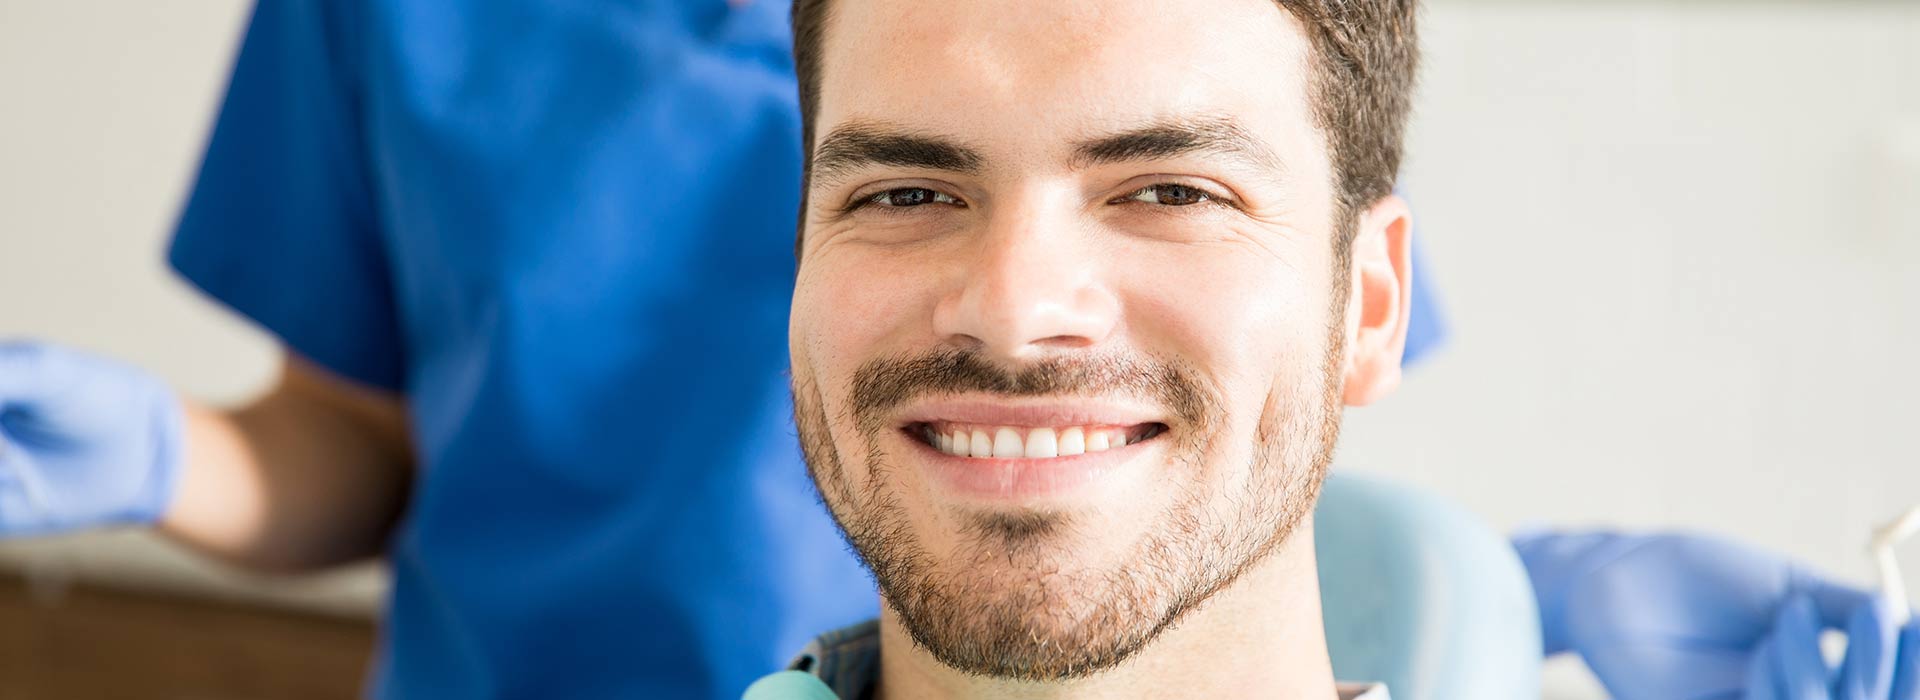 A man is smiling happily after dental bridges treatment.